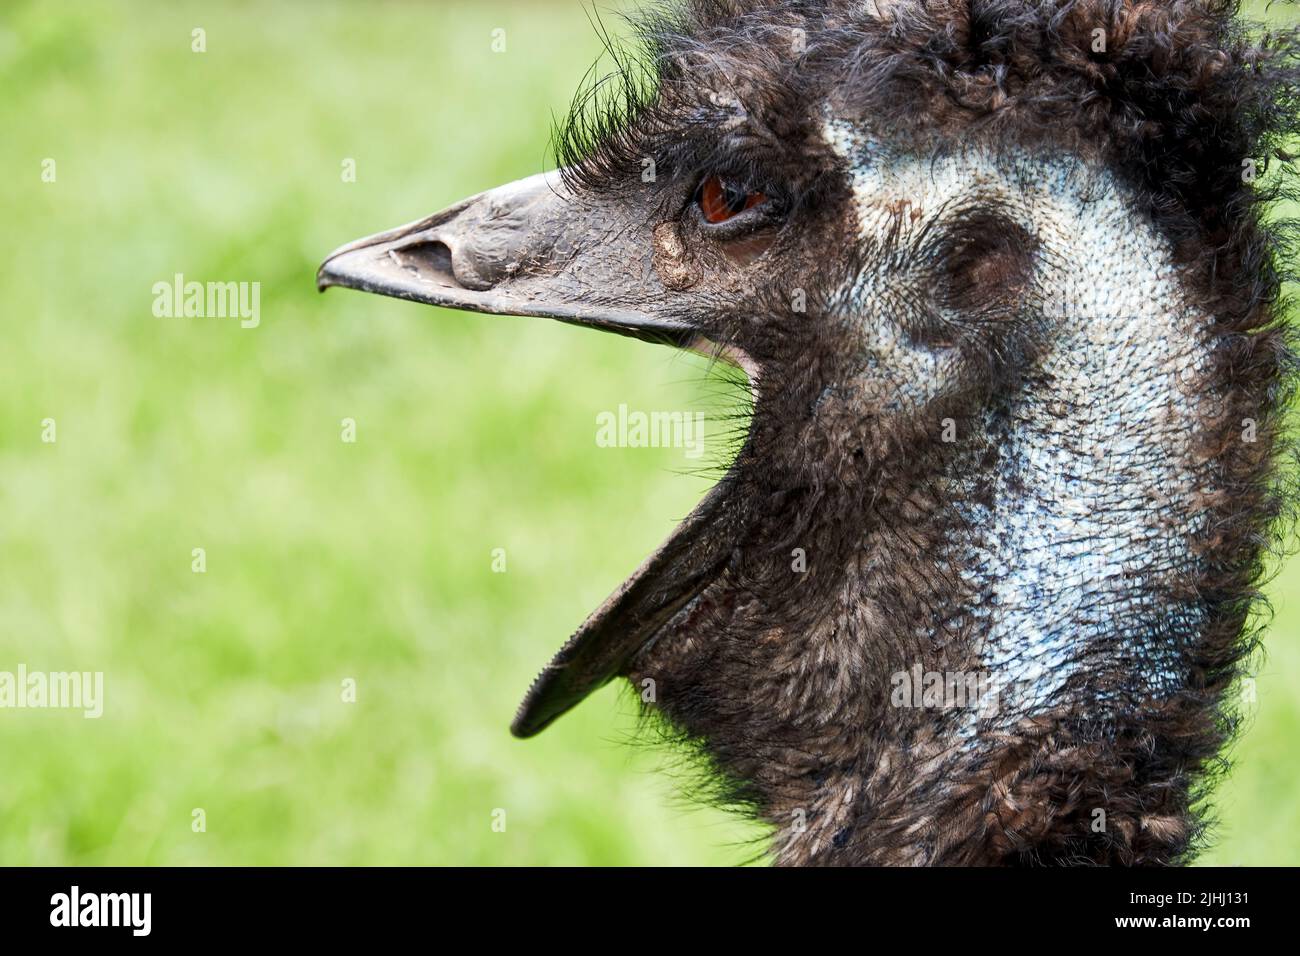 Surprised screaming ostrich, portrait view. Funny animals backgrounds Stock Photo